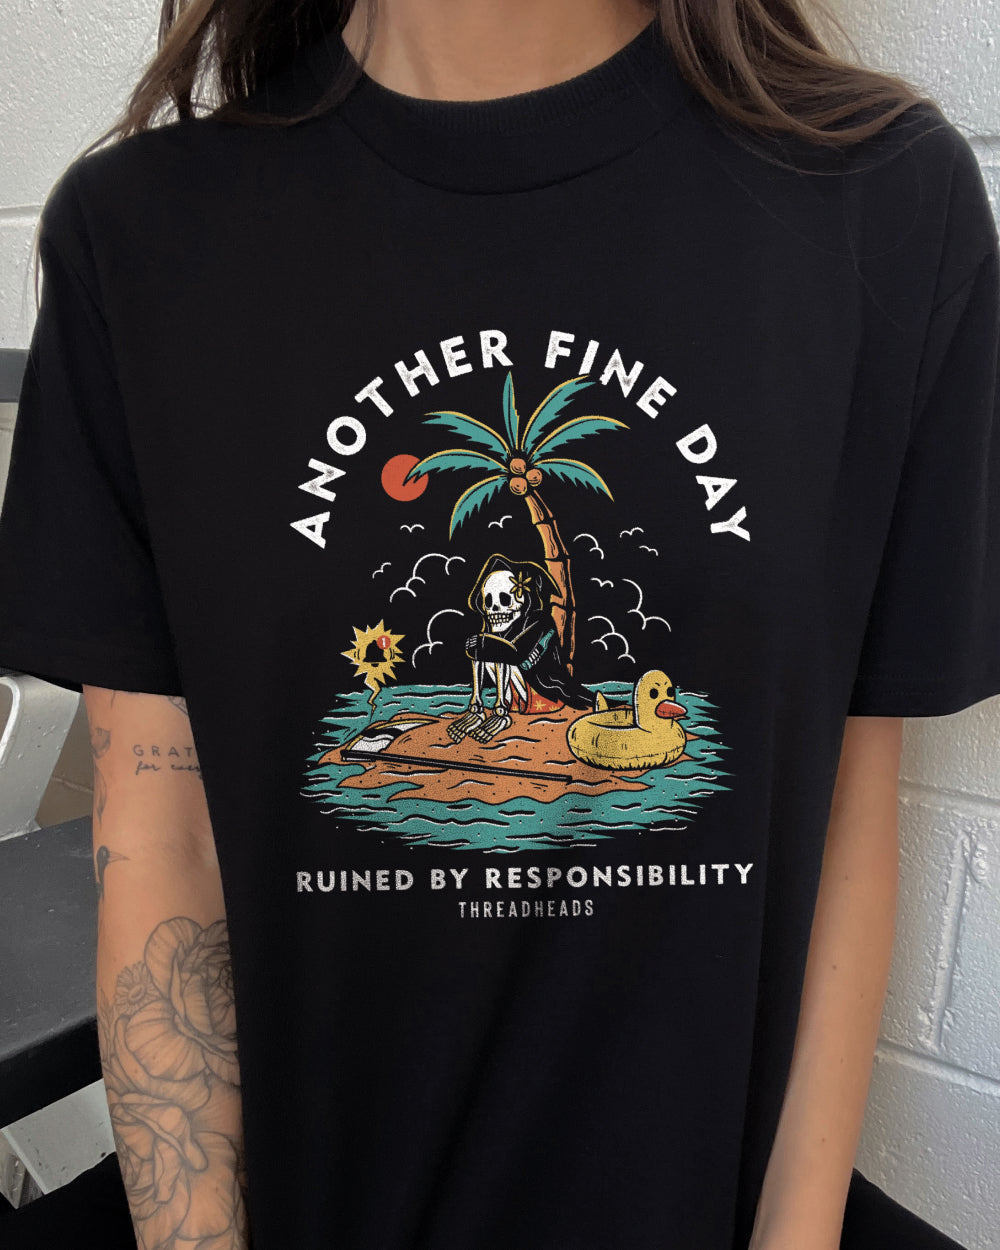 Another Fine Day Ruined by Responsibility T-Shirt | Funny T-Shirt ...